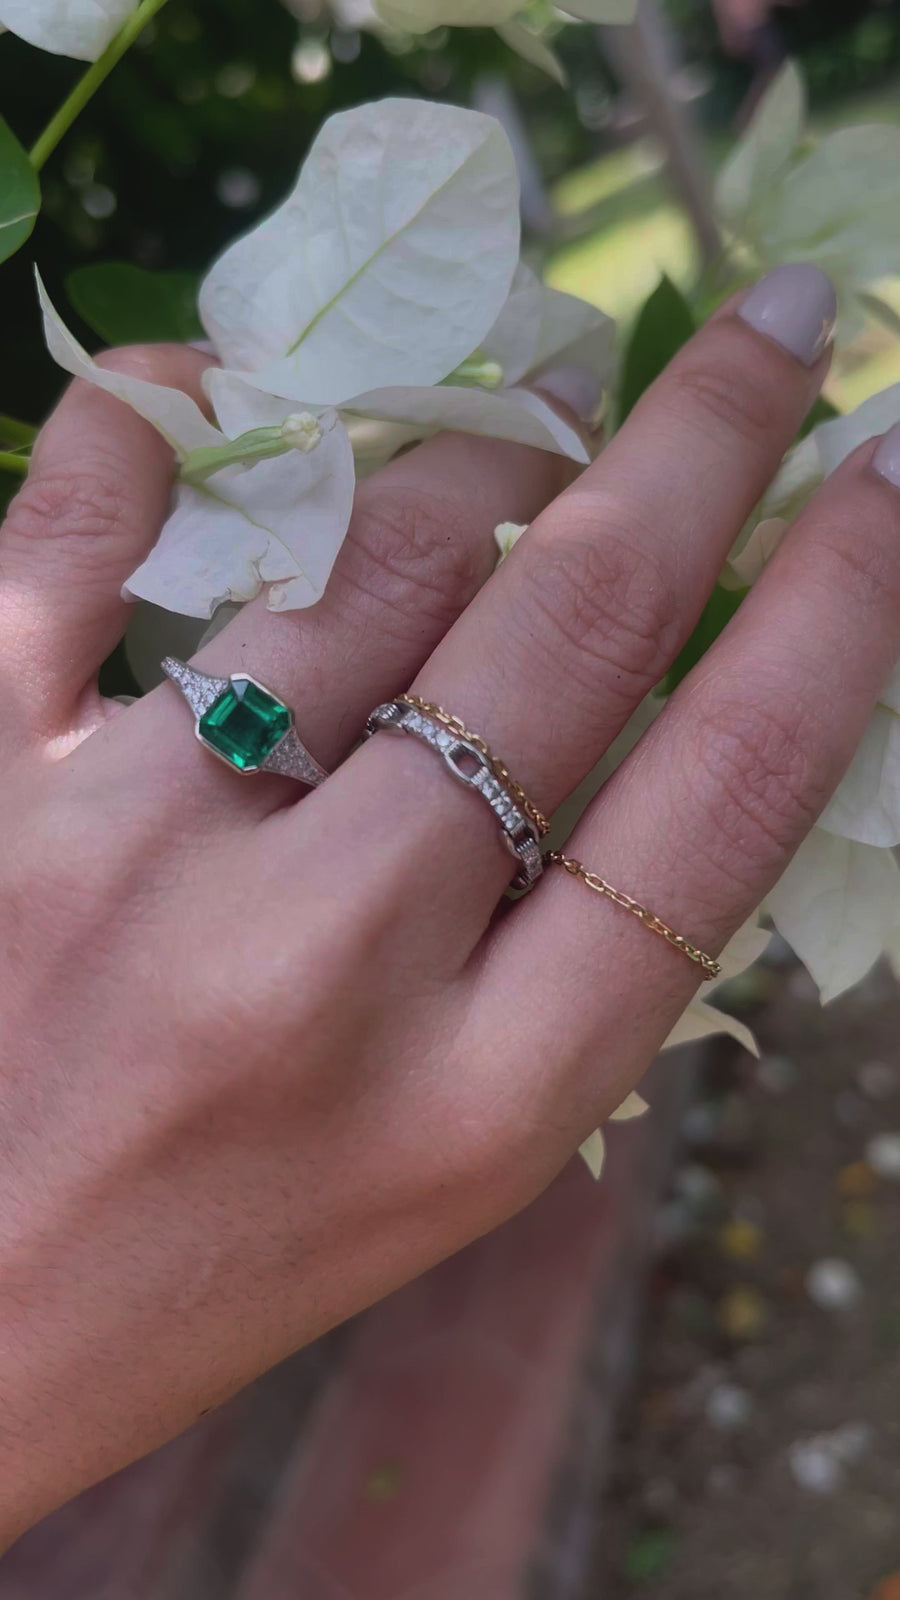 Emerald and pave Diamond eternal ring